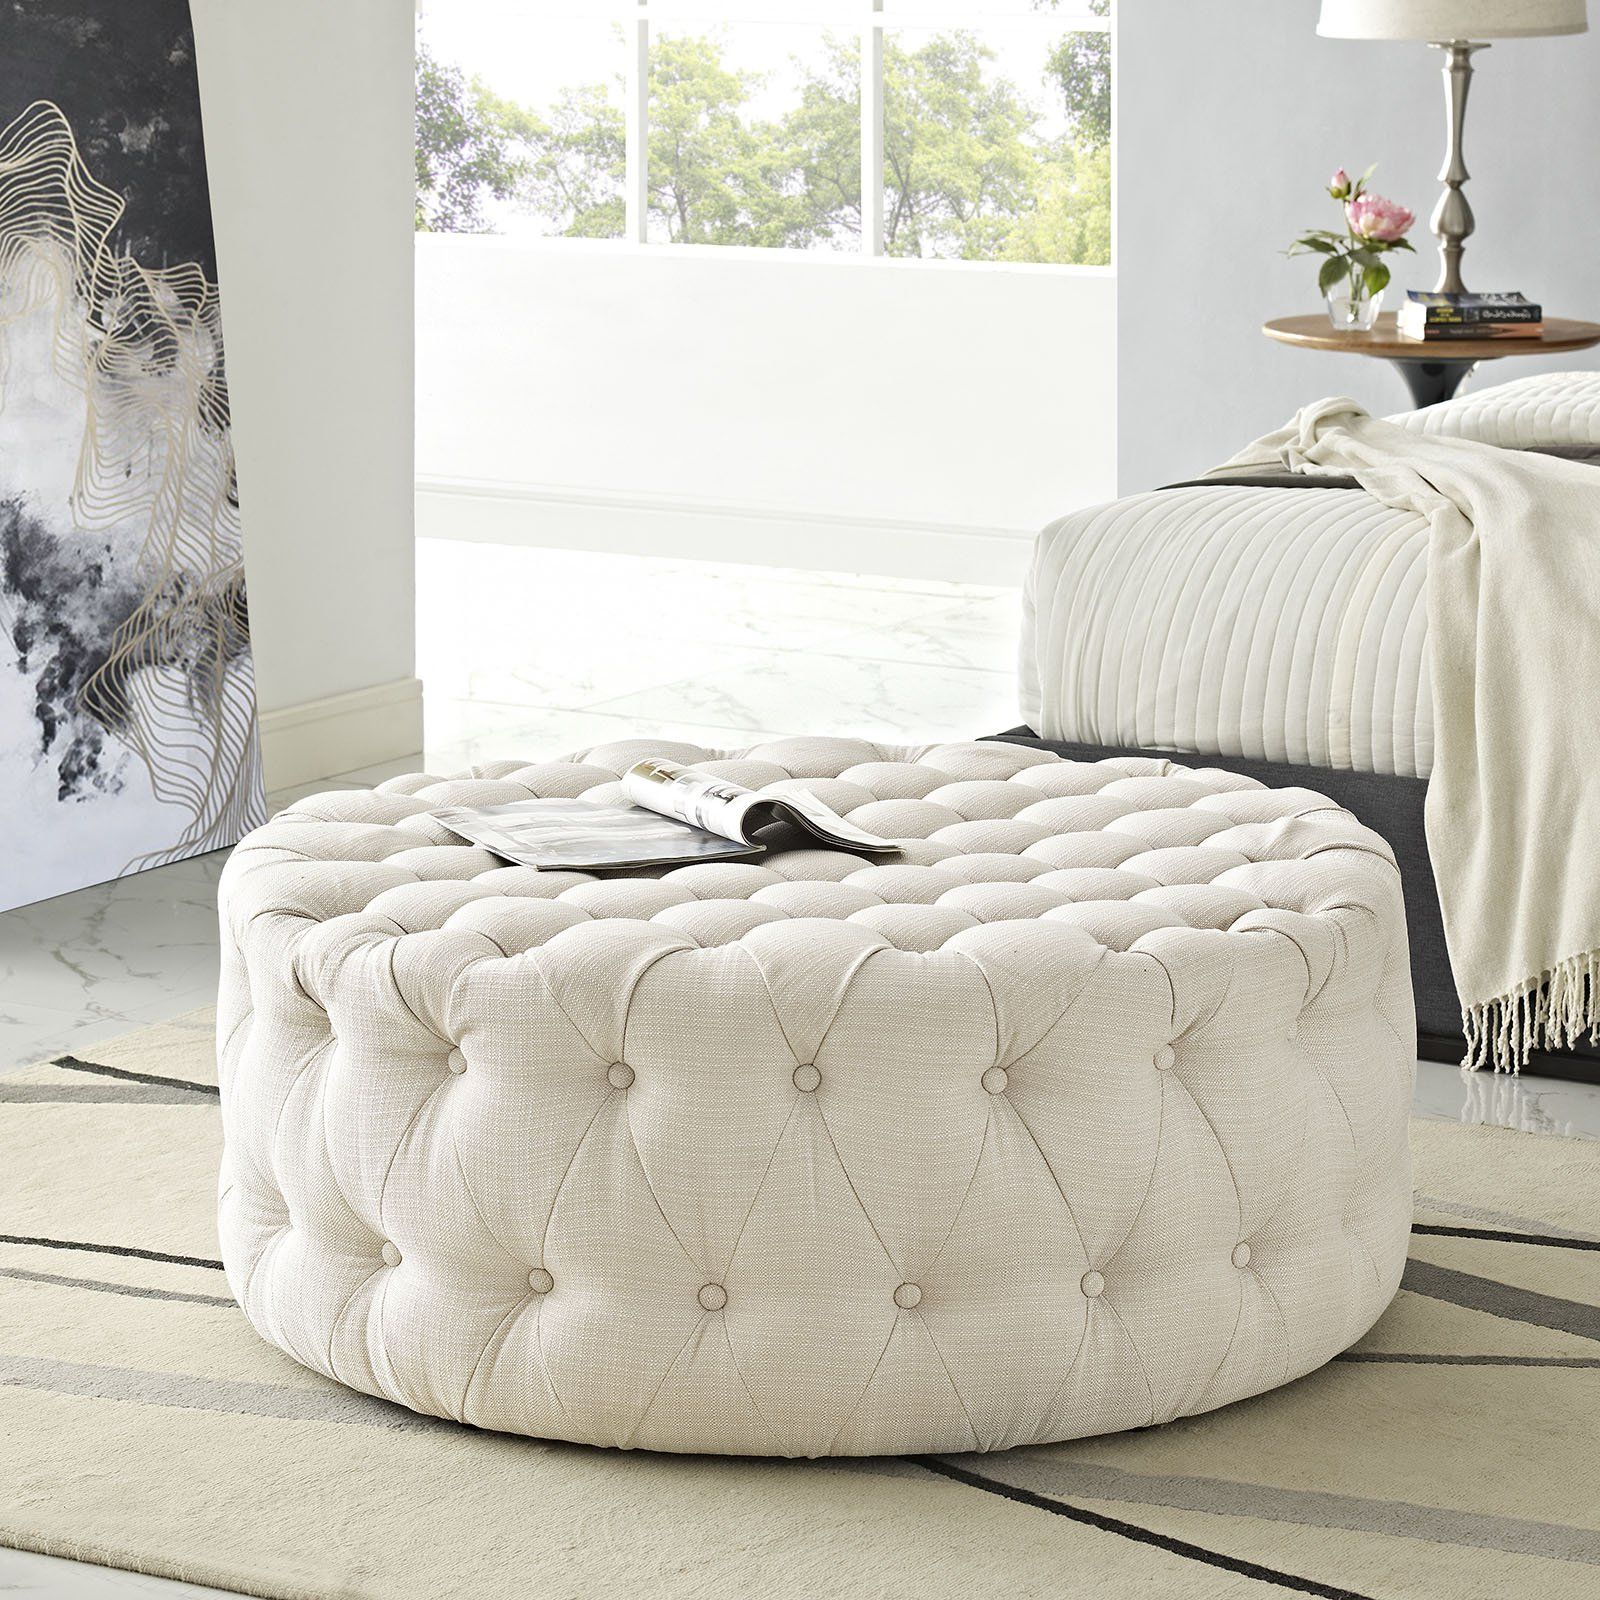 Amazon: Modway Amour Fabric Upholstered Button Tufted Round, Ottoman,  Beige : Home & Kitchen Within Favorite Fabric Upholstered Ottomans (View 3 of 10)